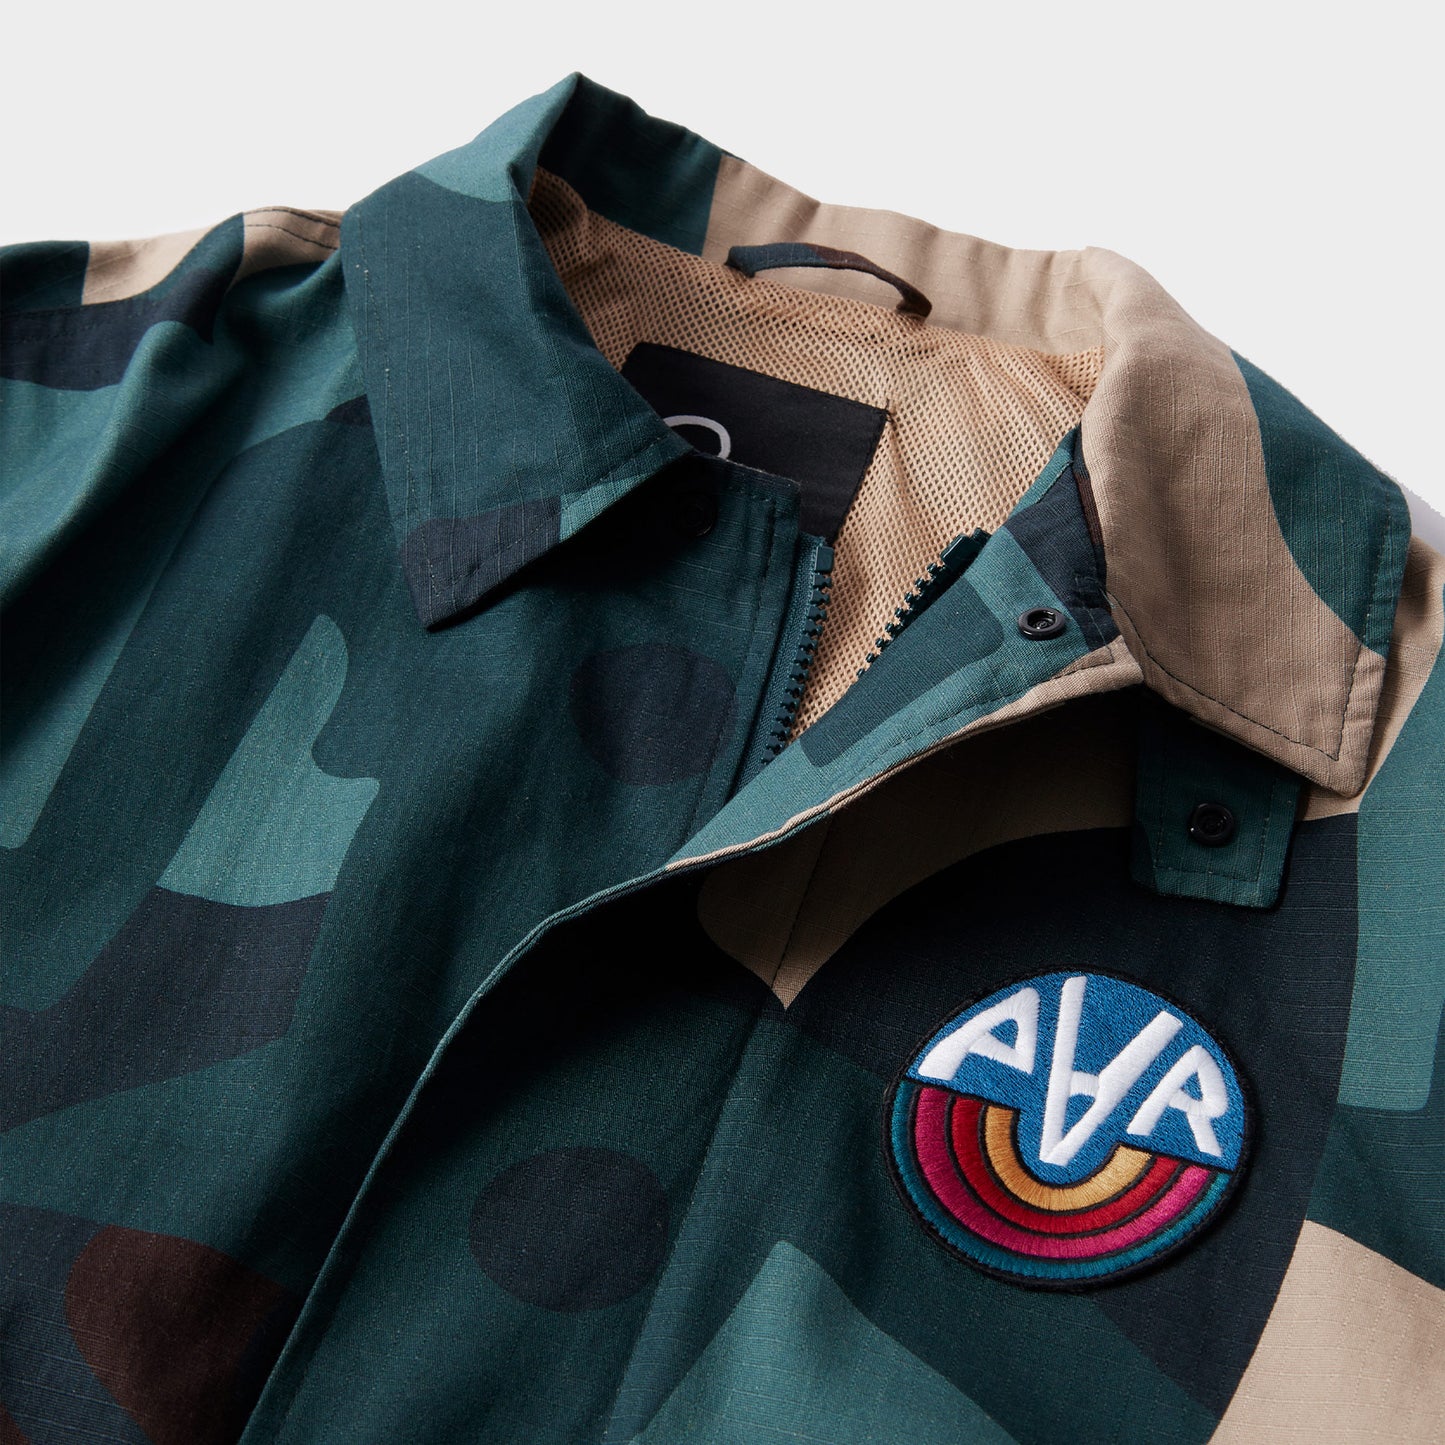 byParra Distorted Camo Jacket in der Farbe green